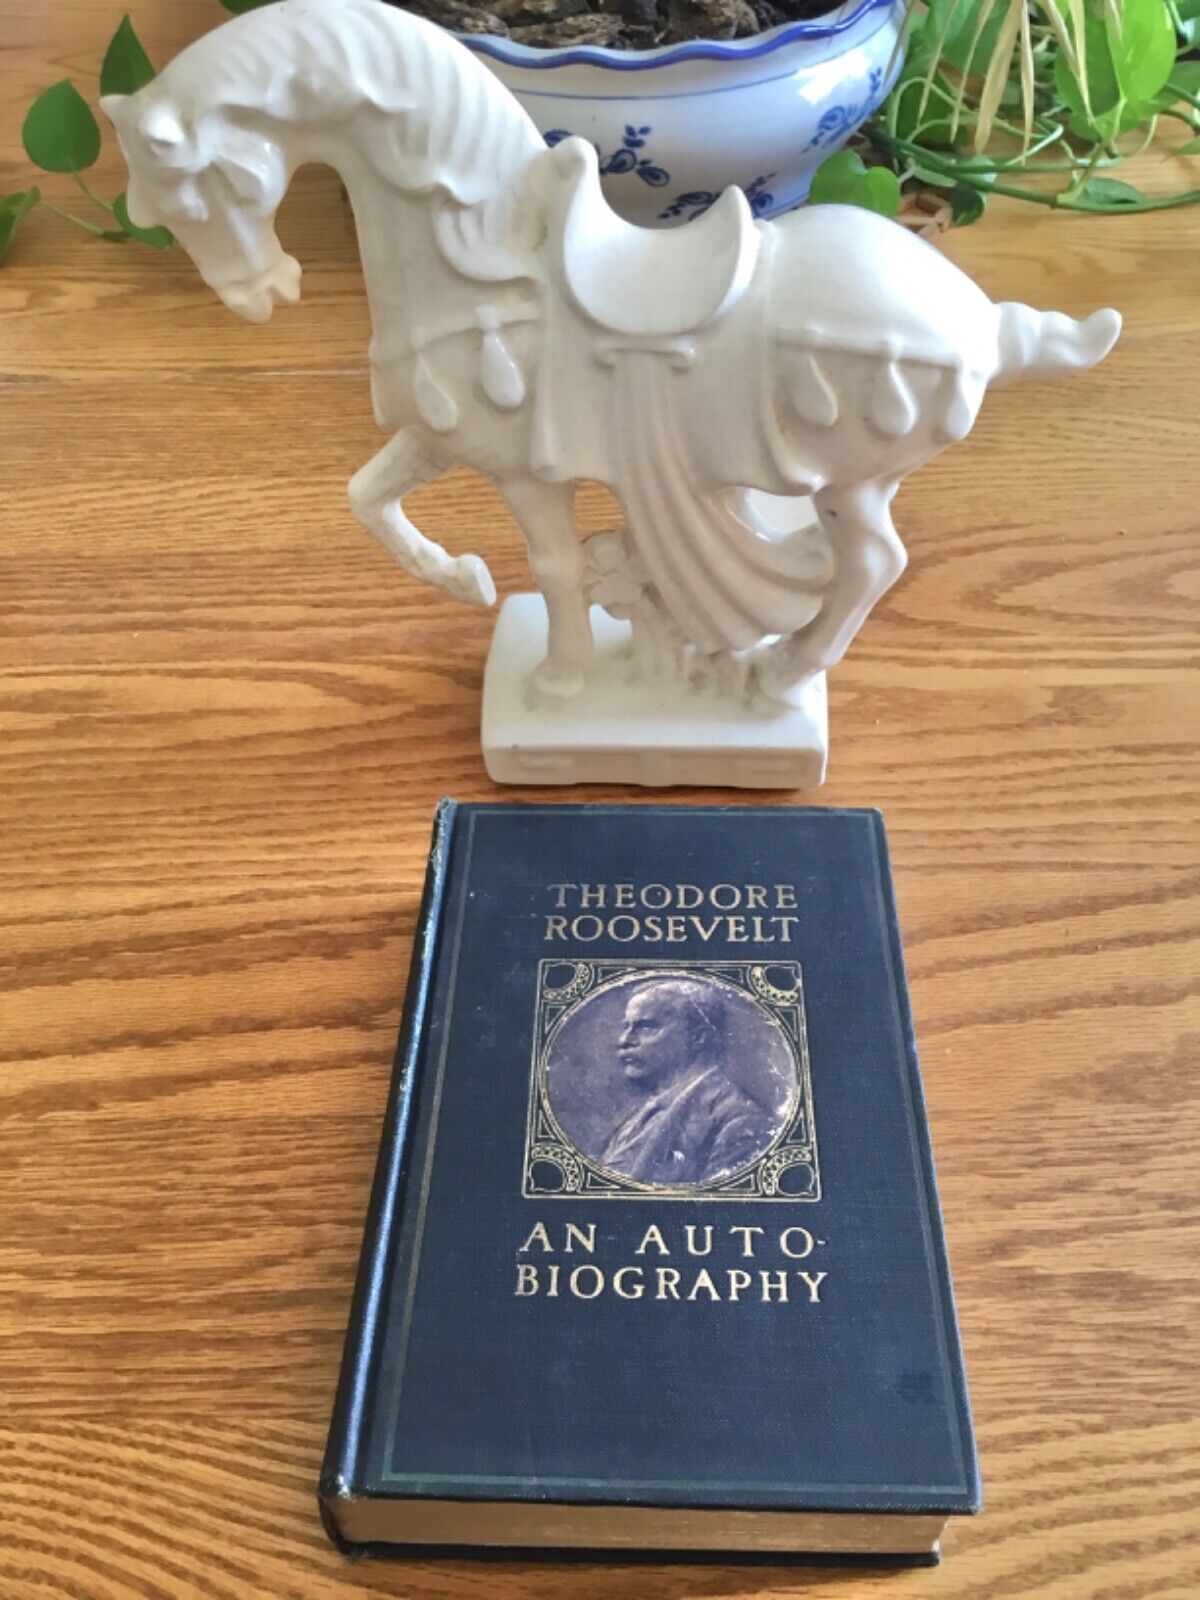 Theodore Roosevelt An Autobiography, with Illustrations, 2nd Ed, 1914, Macmillan